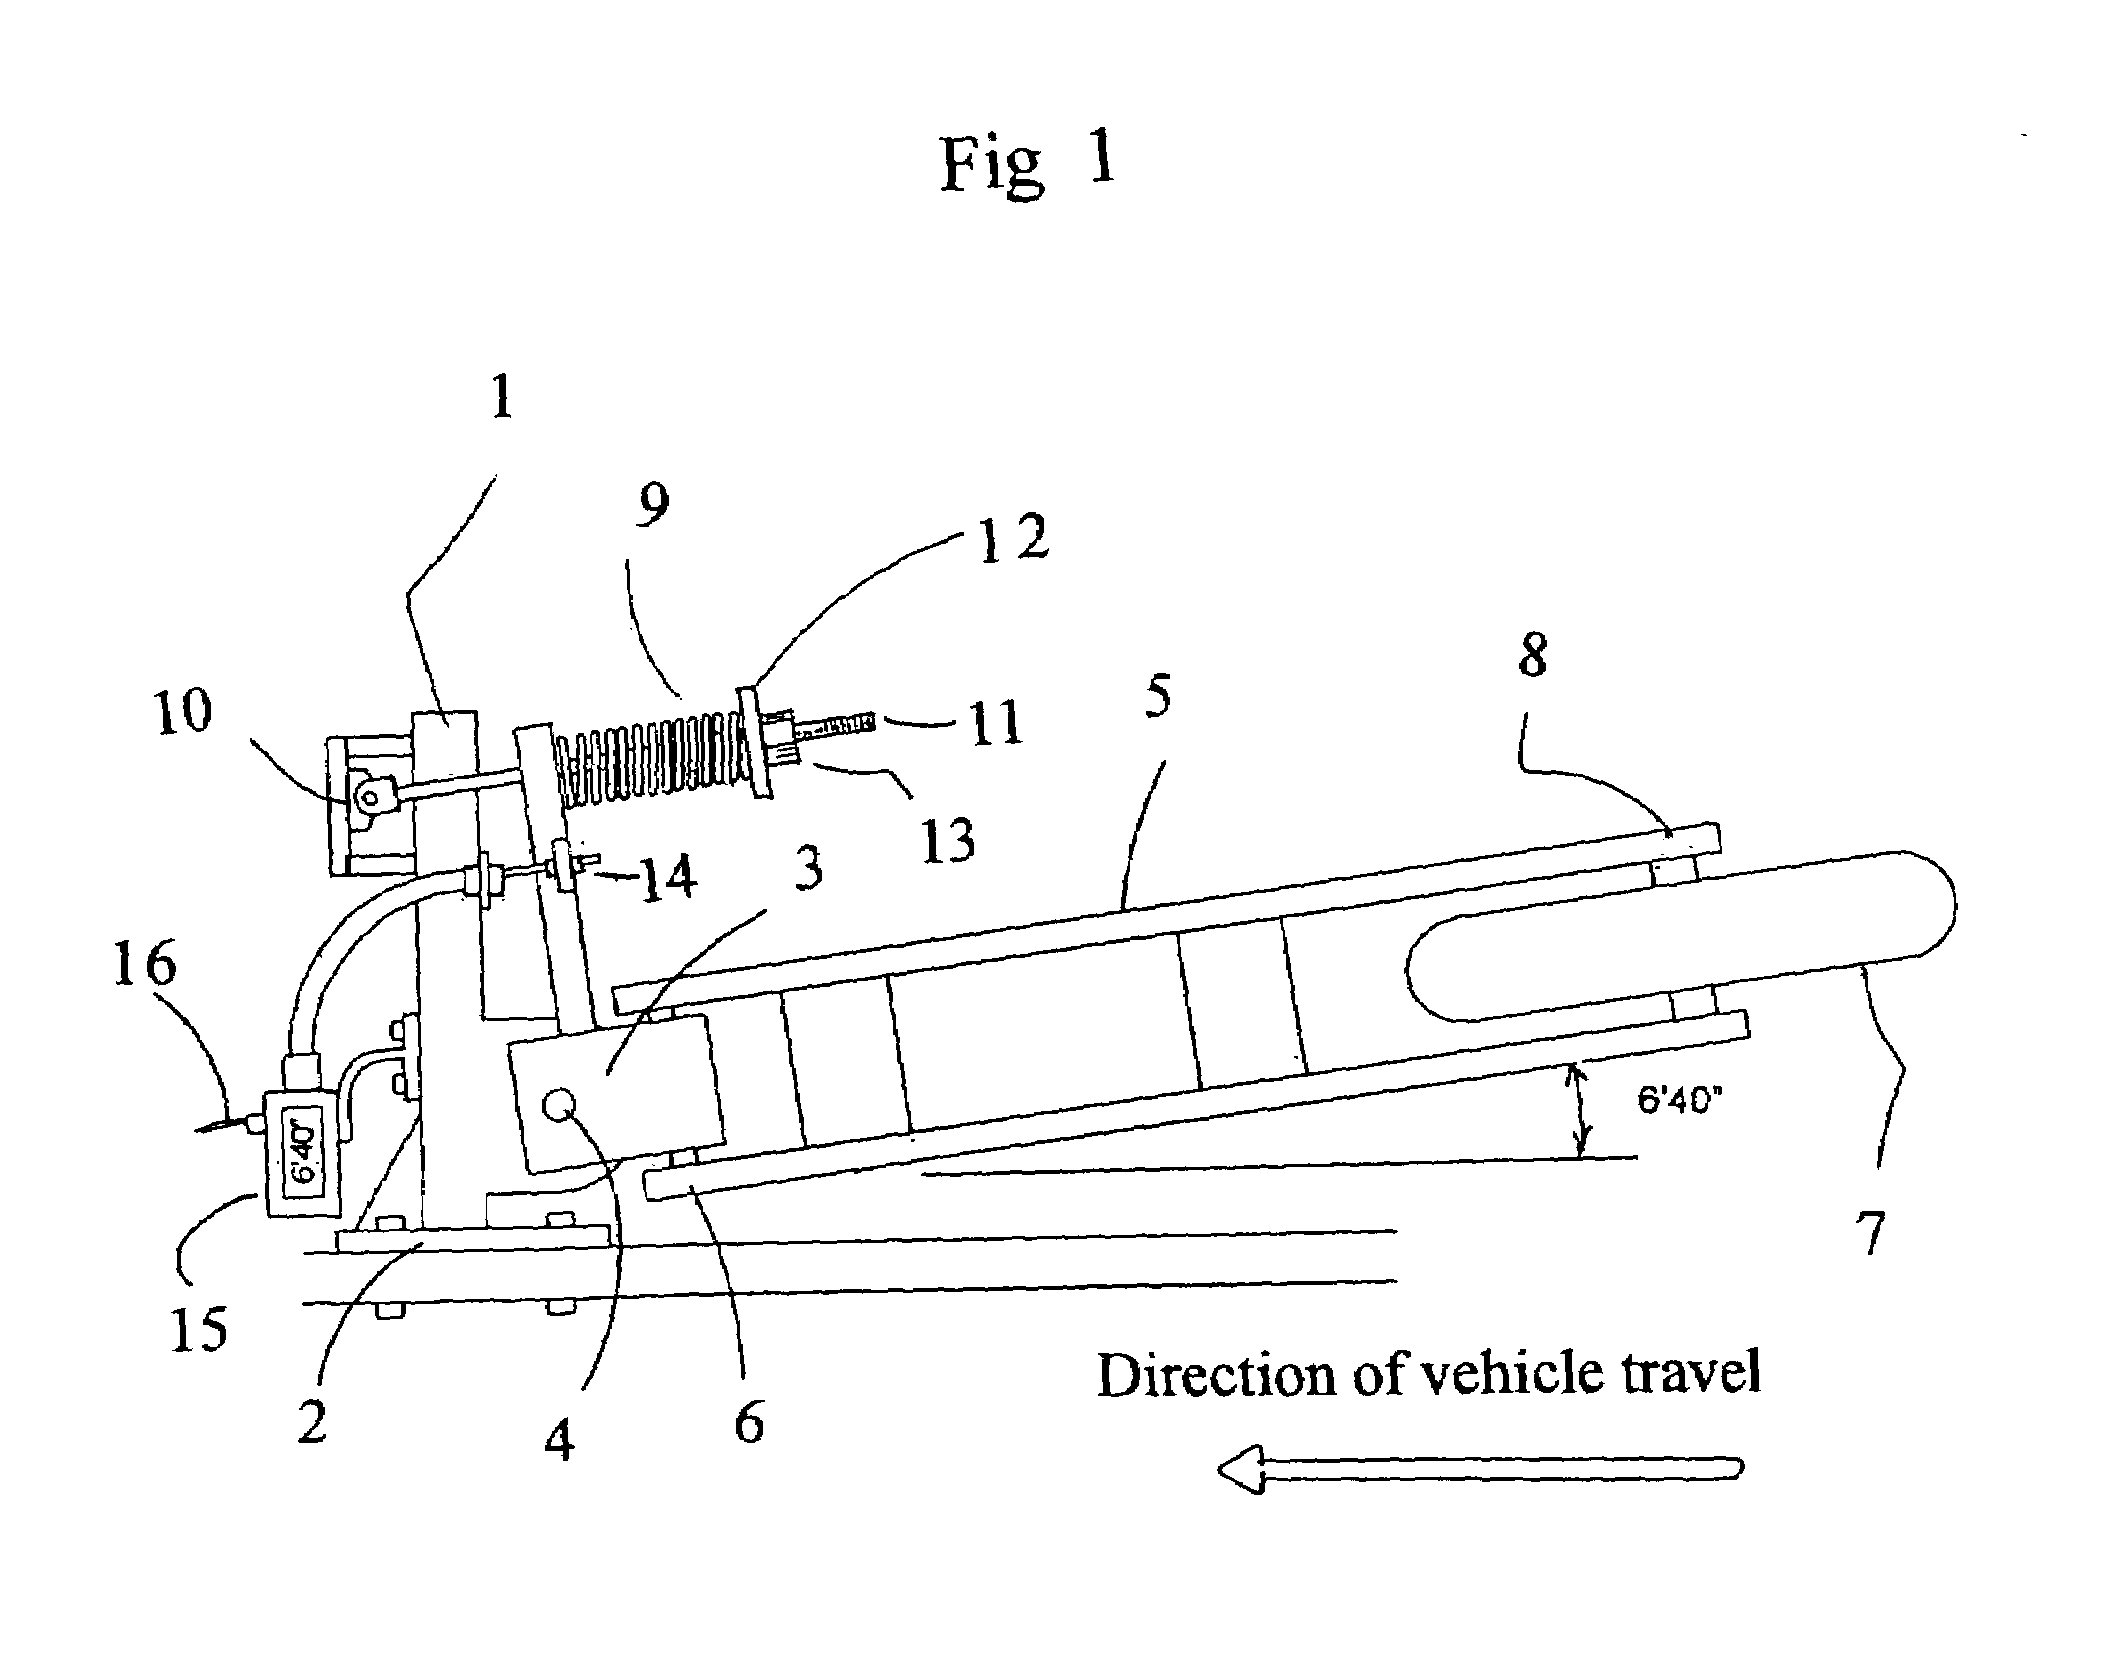 Apparatus for continuous measurement of road surface friction